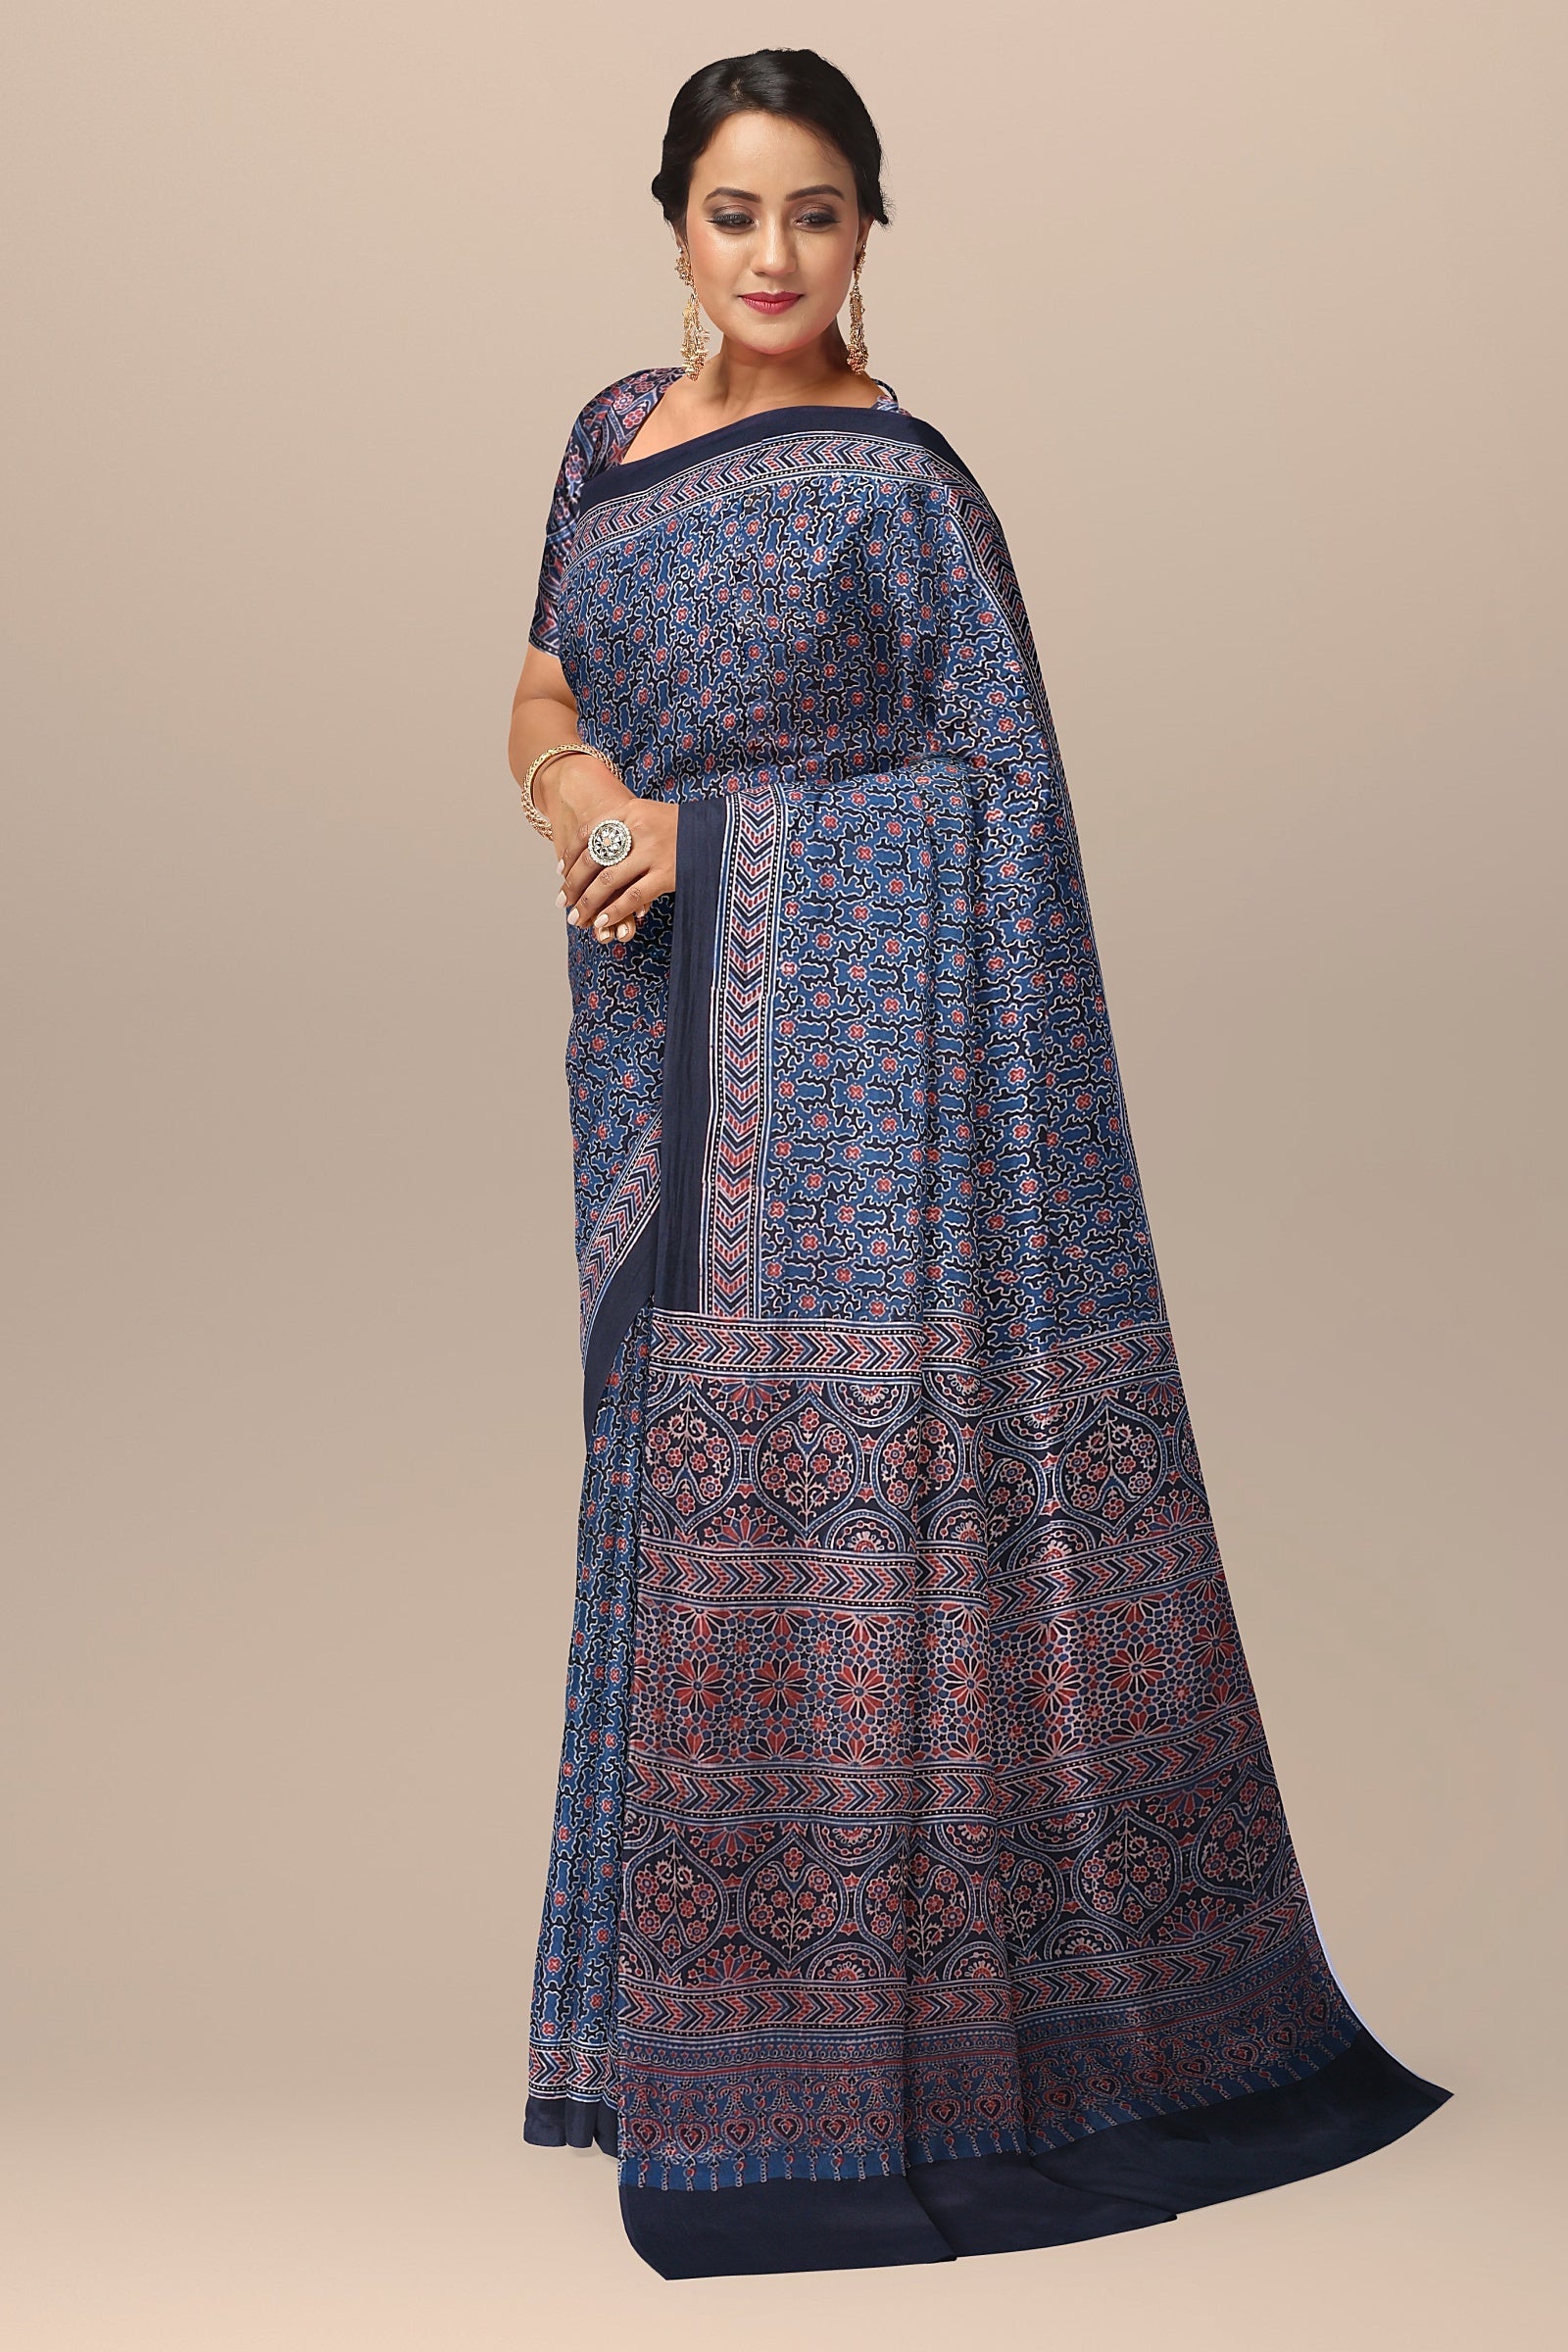 Black Color Traditional Blue and Red Floral and Geometrical Ajrakh Print Modal Silk Saree  SKU-BS10070 - Bhartiya Shilp